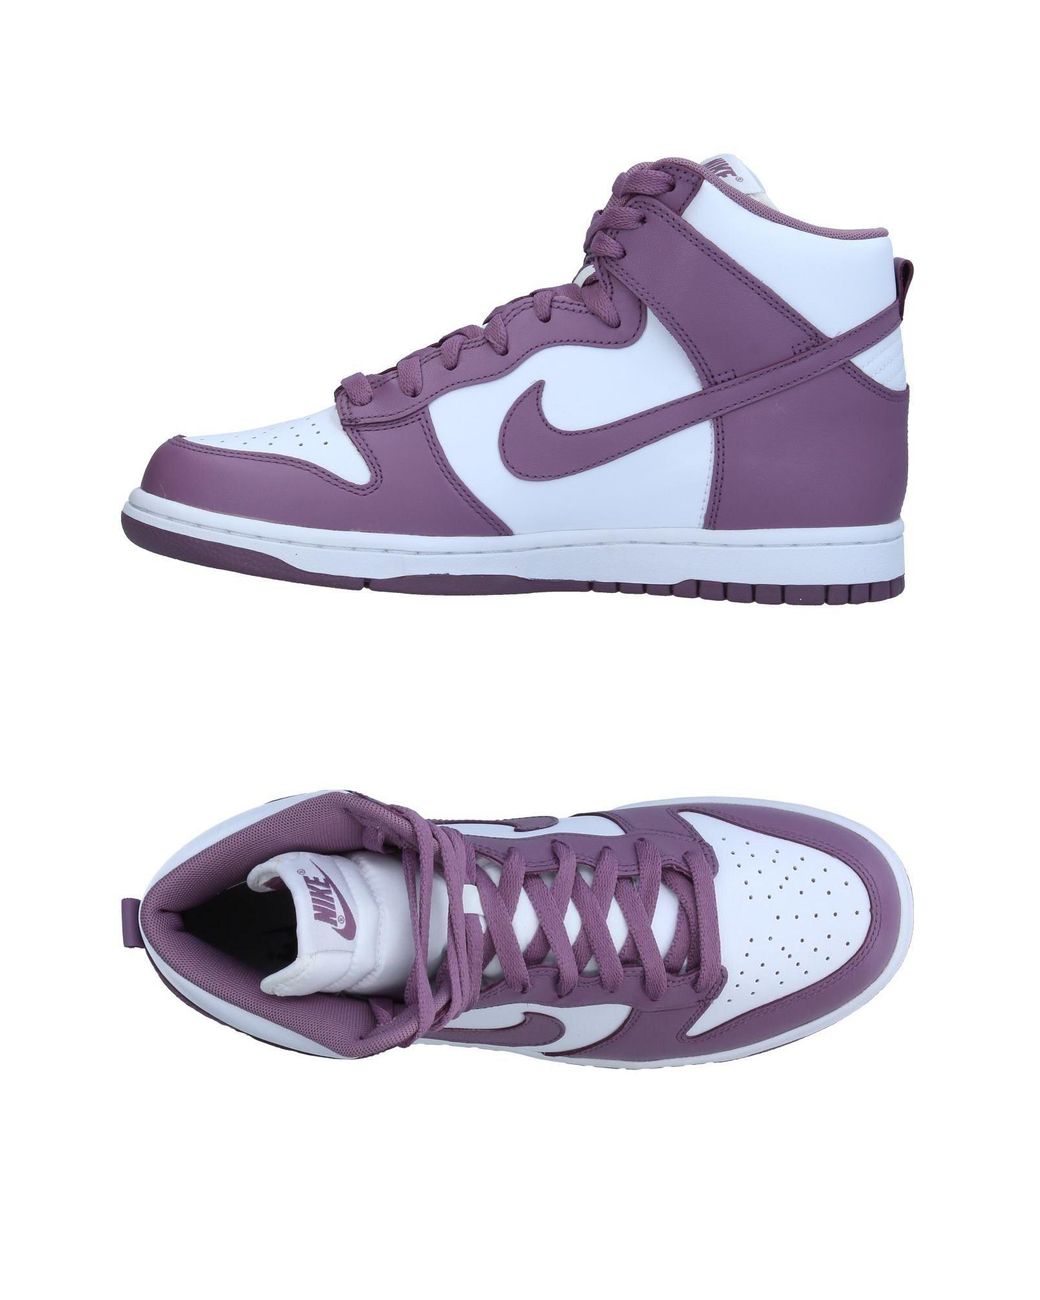 Nike Leather High-tops & Sneakers in Mauve (Purple) | Lyst